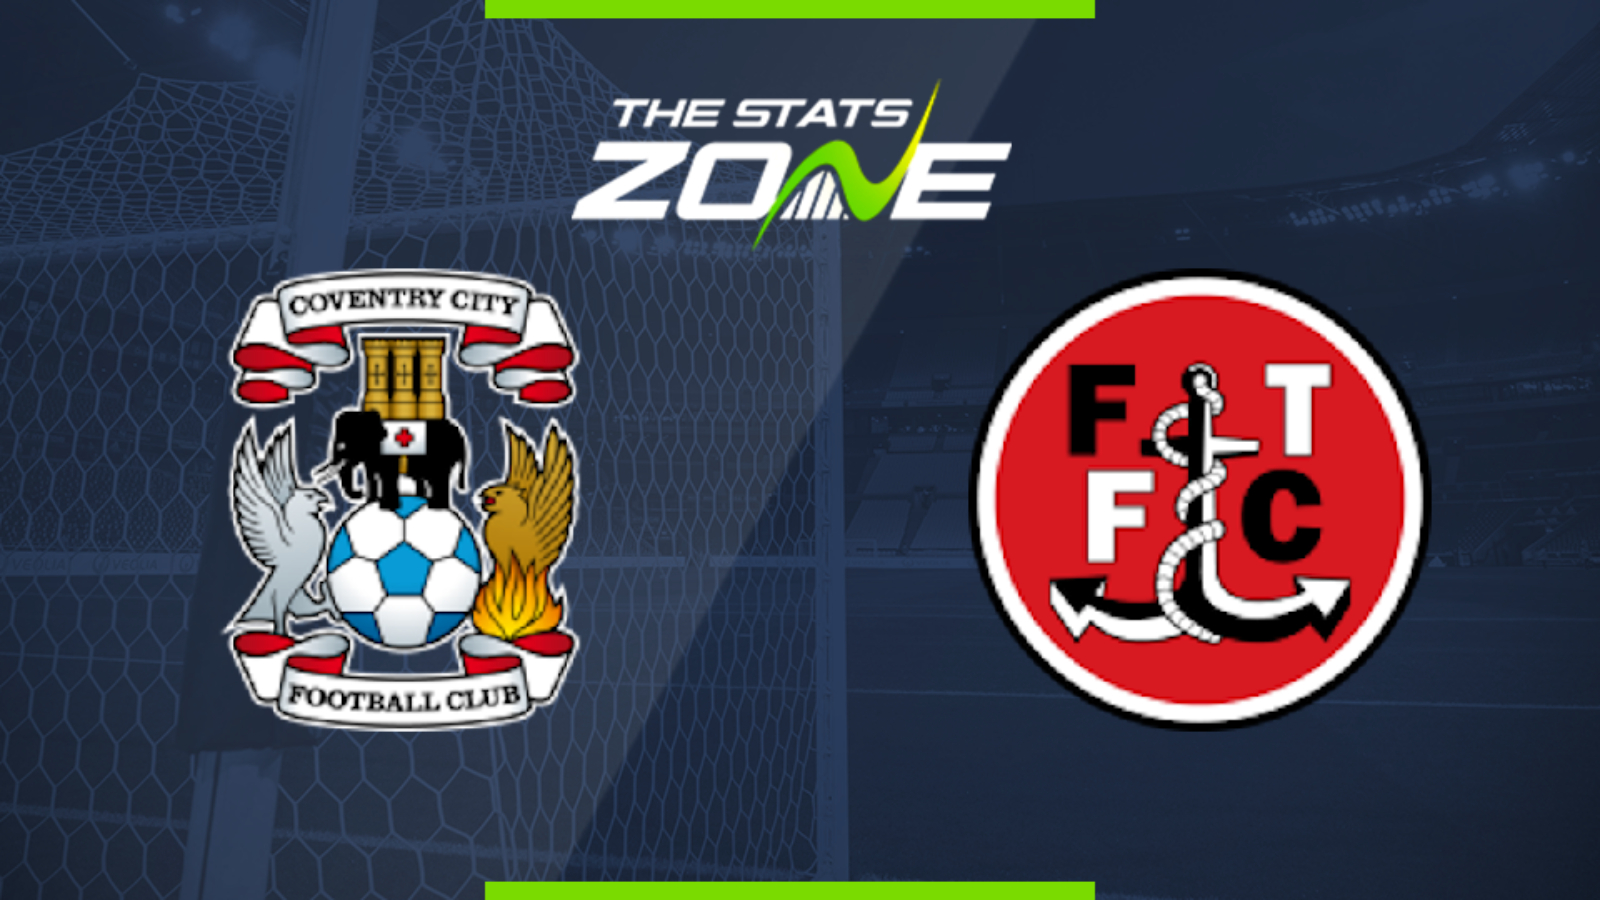 2019-20 League 1 – Coventry vs Fleetwood Preview & Prediction - The Stats Zone